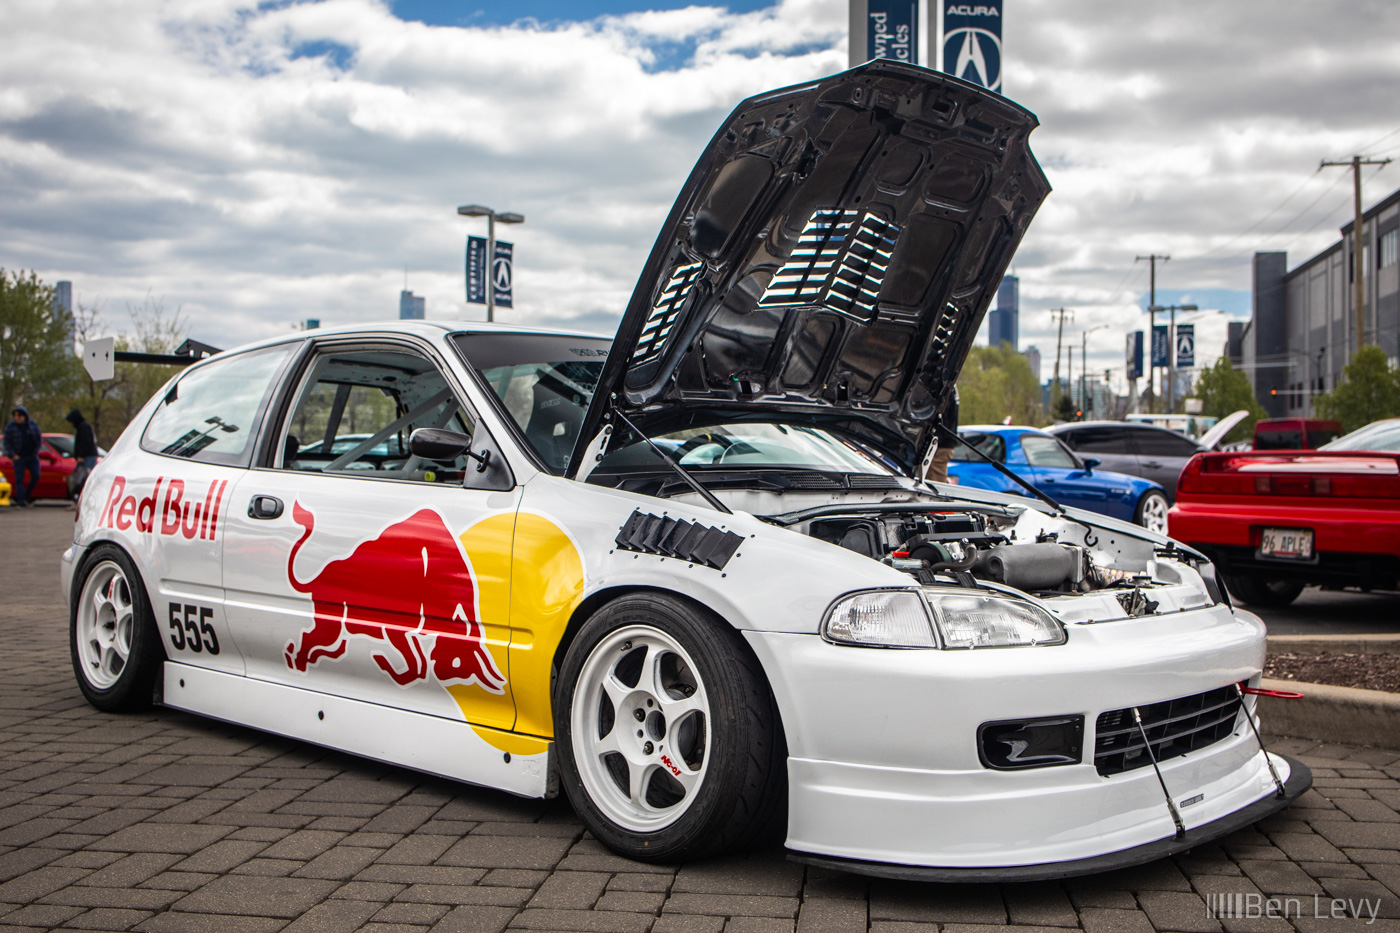 White Civic Hatchback with Red Bull Livery